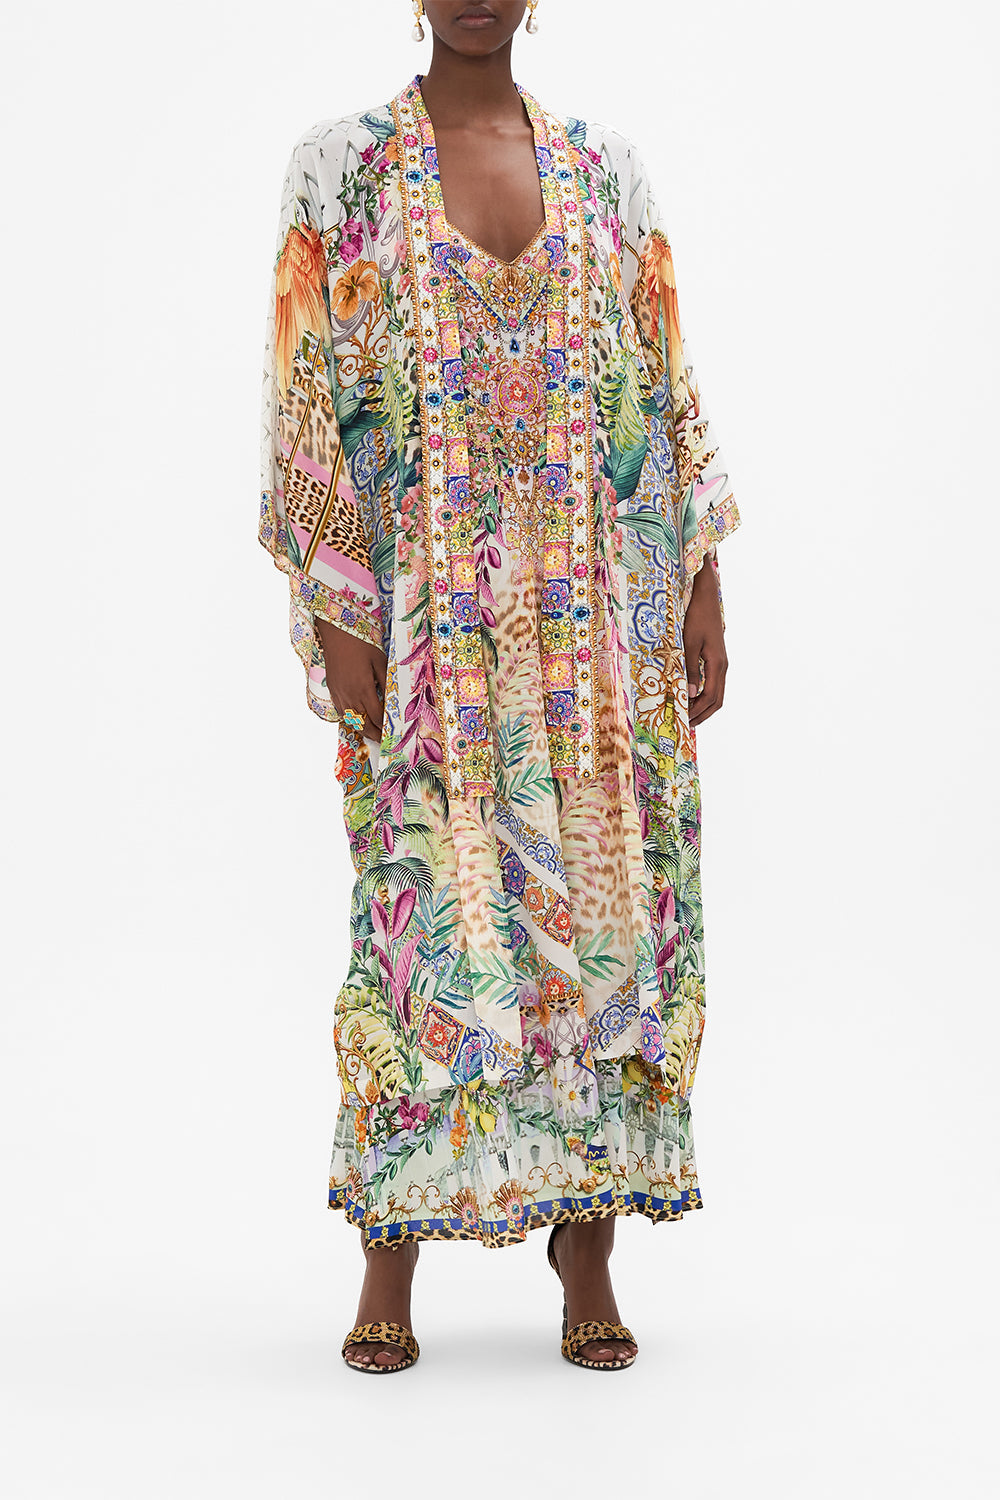 Front view of model wearing CAMILLA floral silk kimono in Flowers of Neptune print